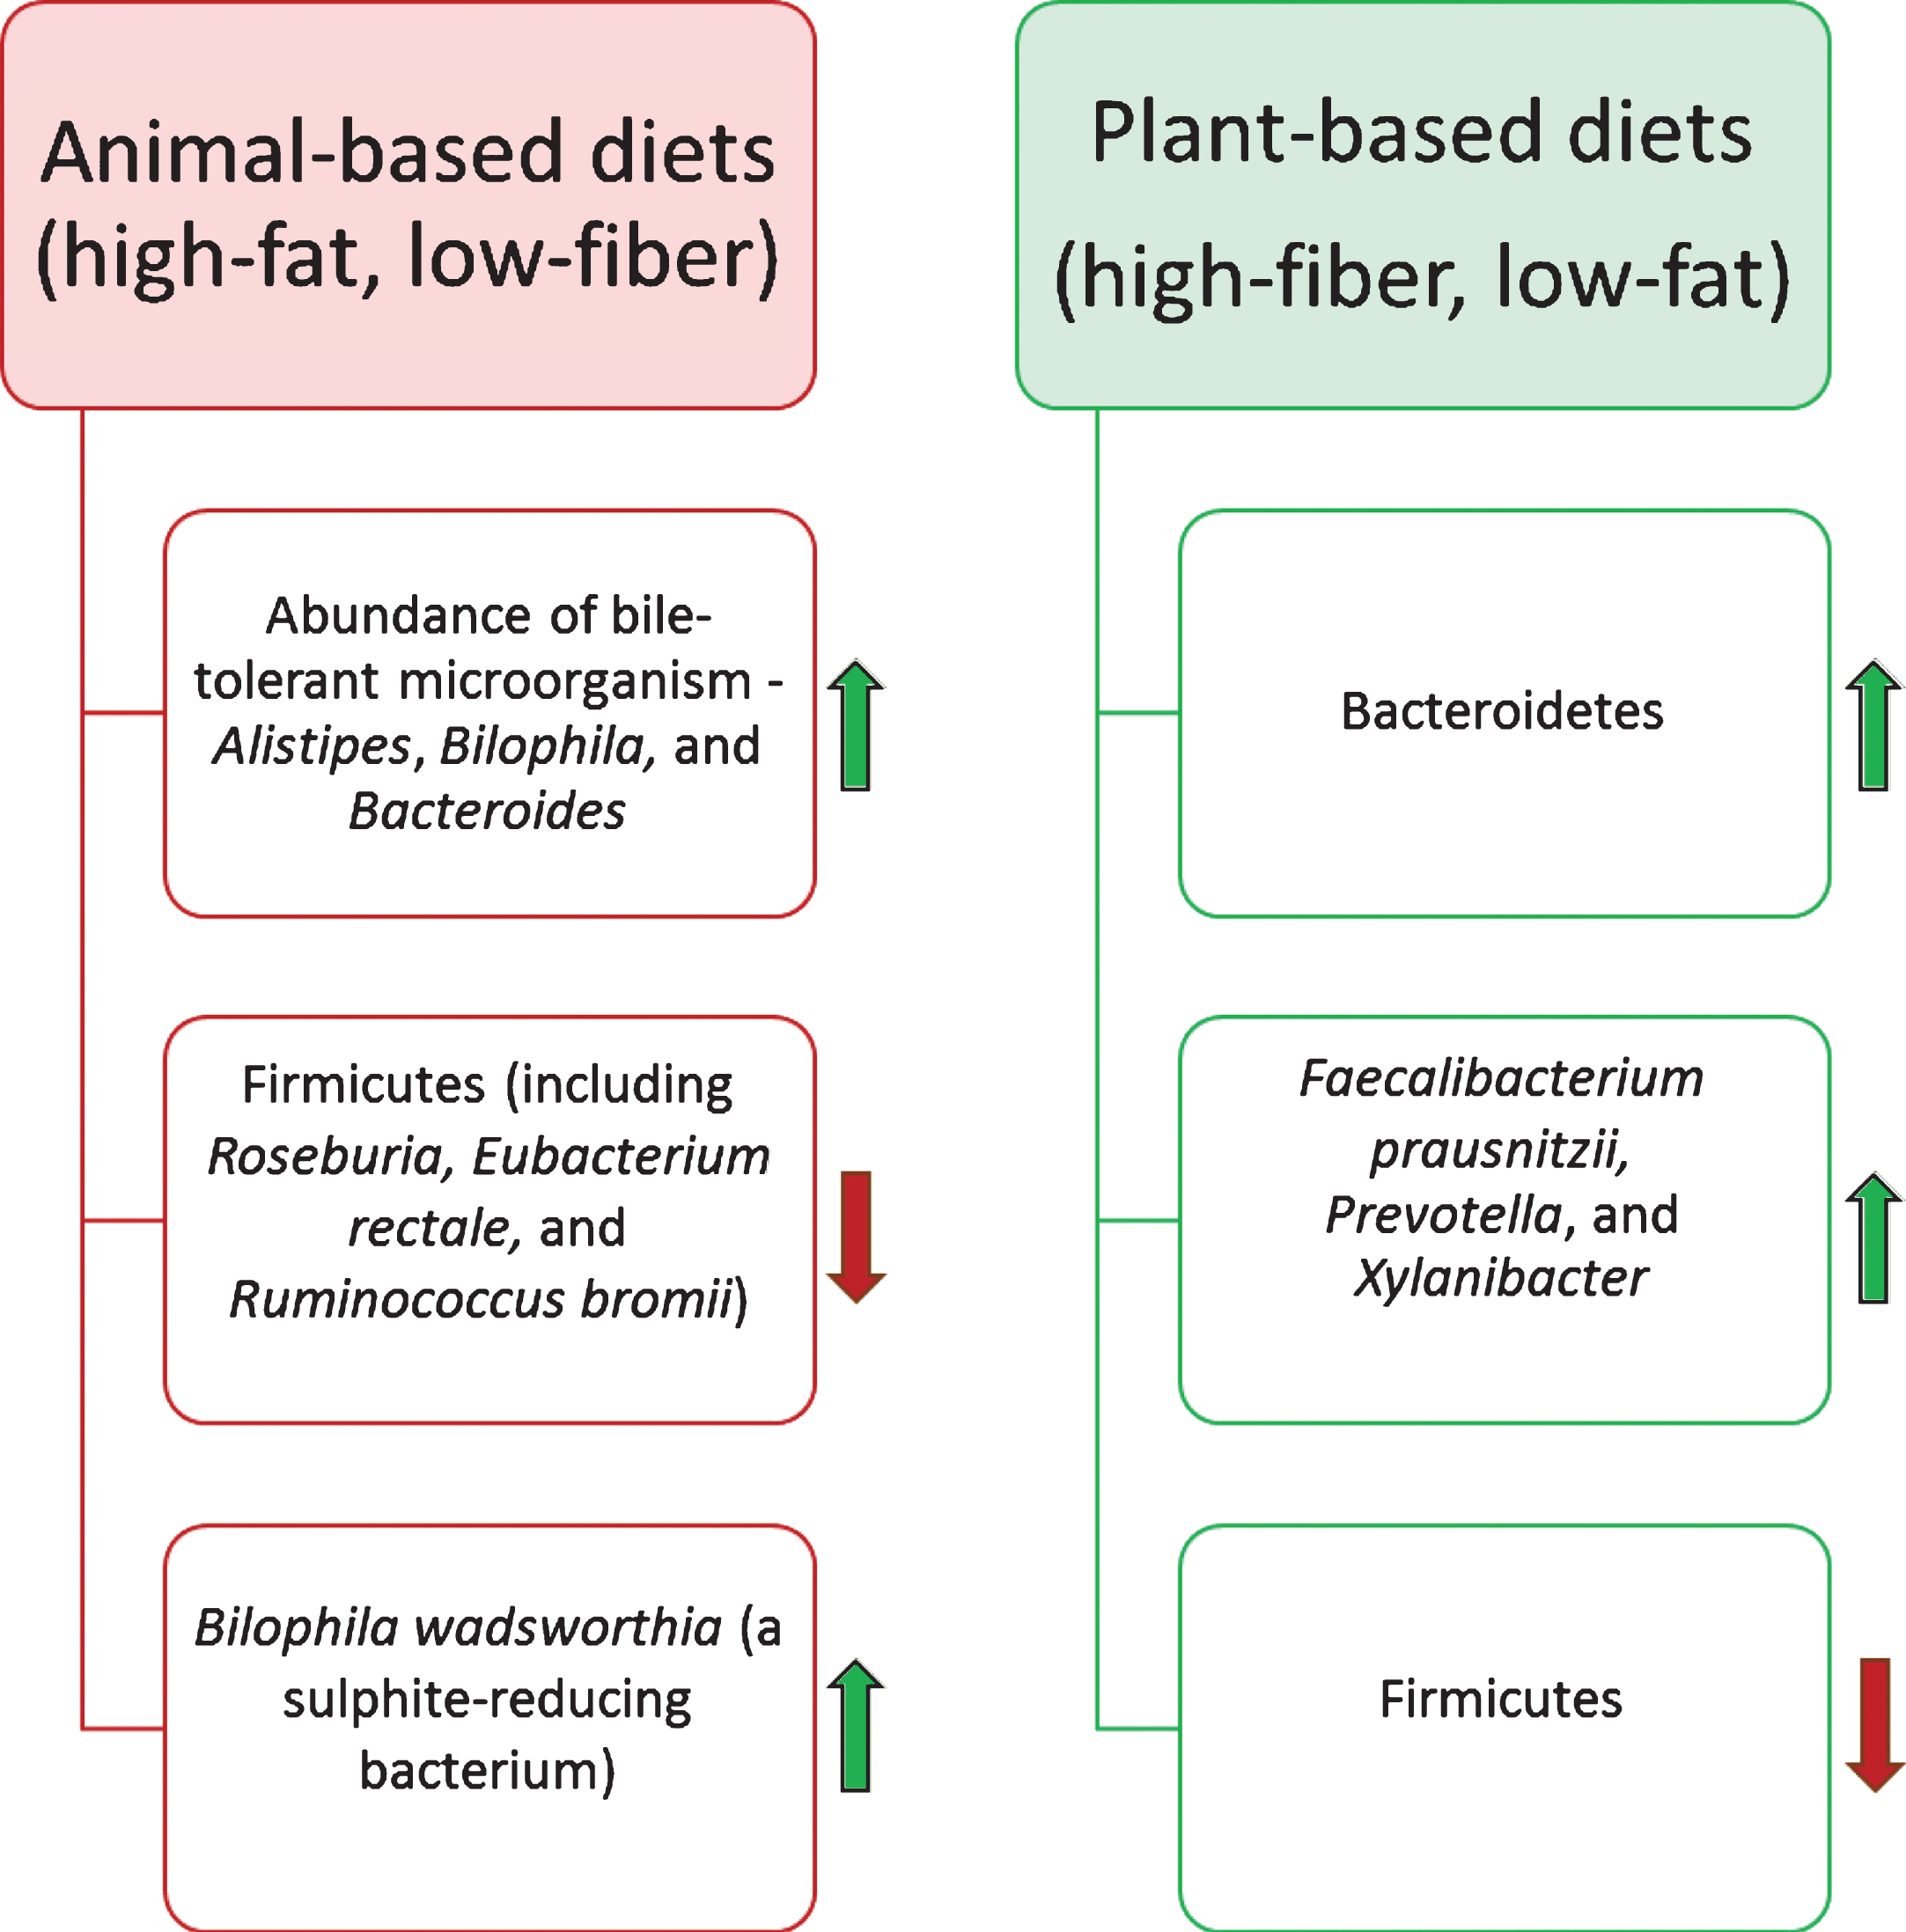 Impact of the diet on the human gut microbiota composition. Diet is one of the most influential factors for altering the composition of the gut microbiota. Animal-based diets promote the growth of bile-tolerate microorganisms. In contrast, plant-based diets elevate the abundance of polysaccharides-digesting bacterial species.